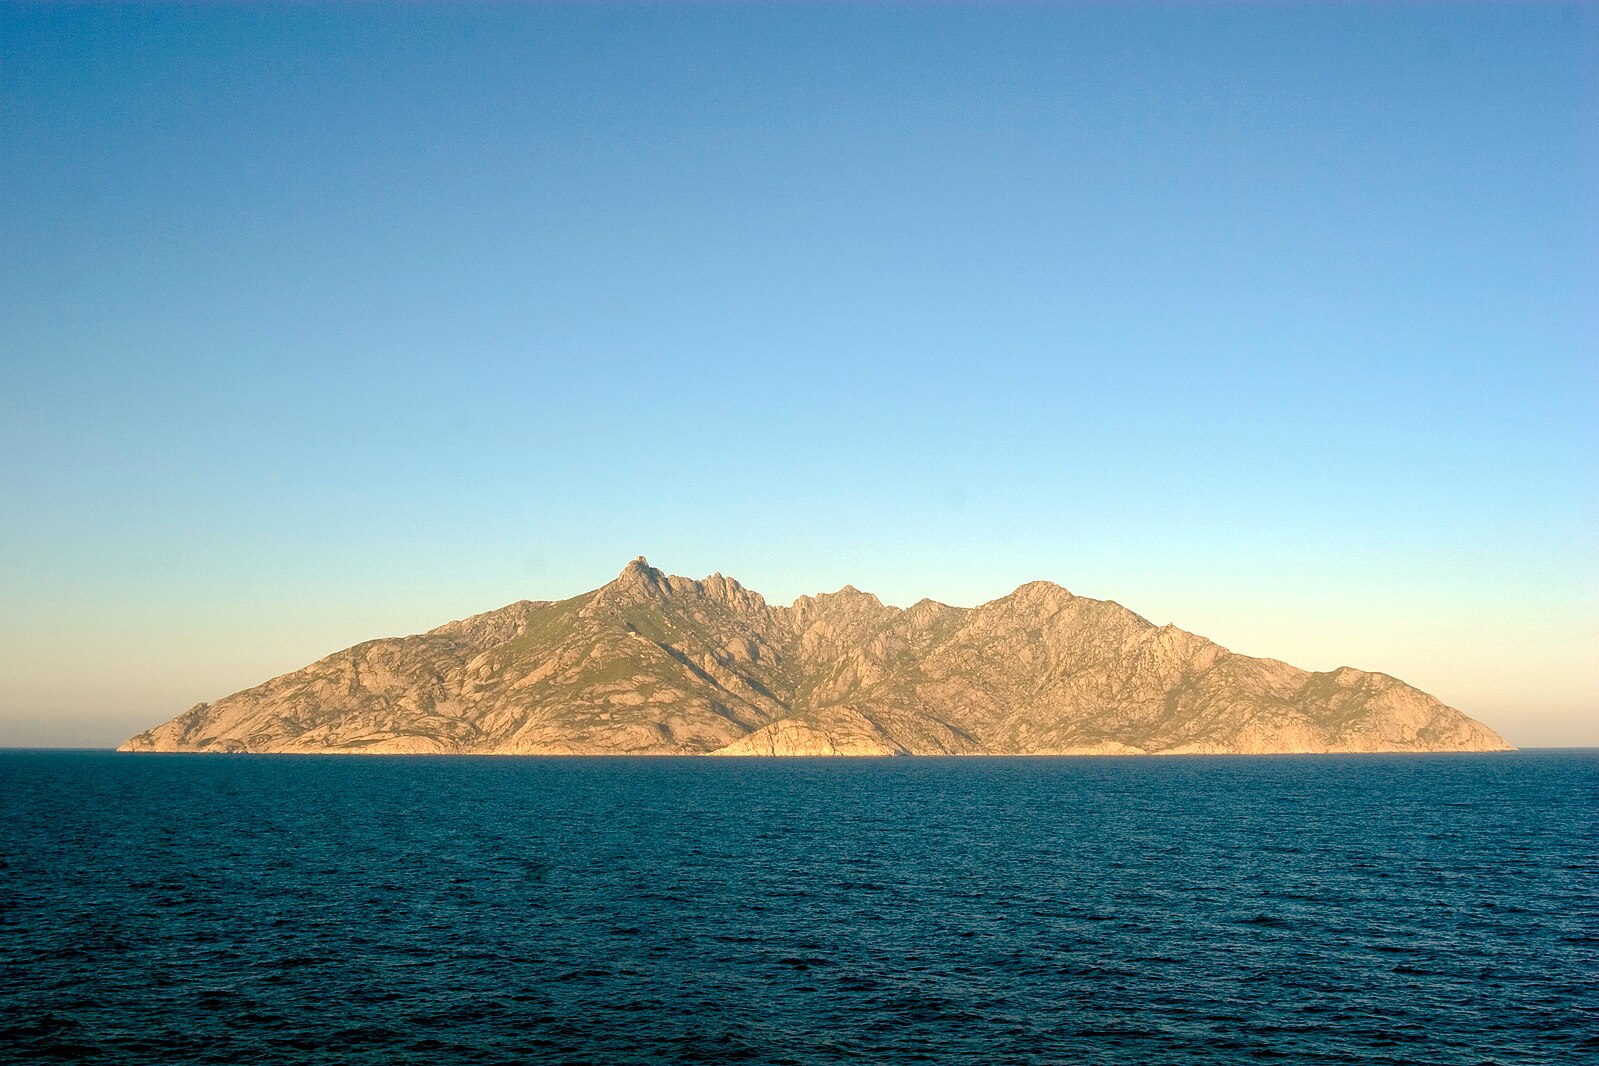 The island of Montecristo seen from the mainland